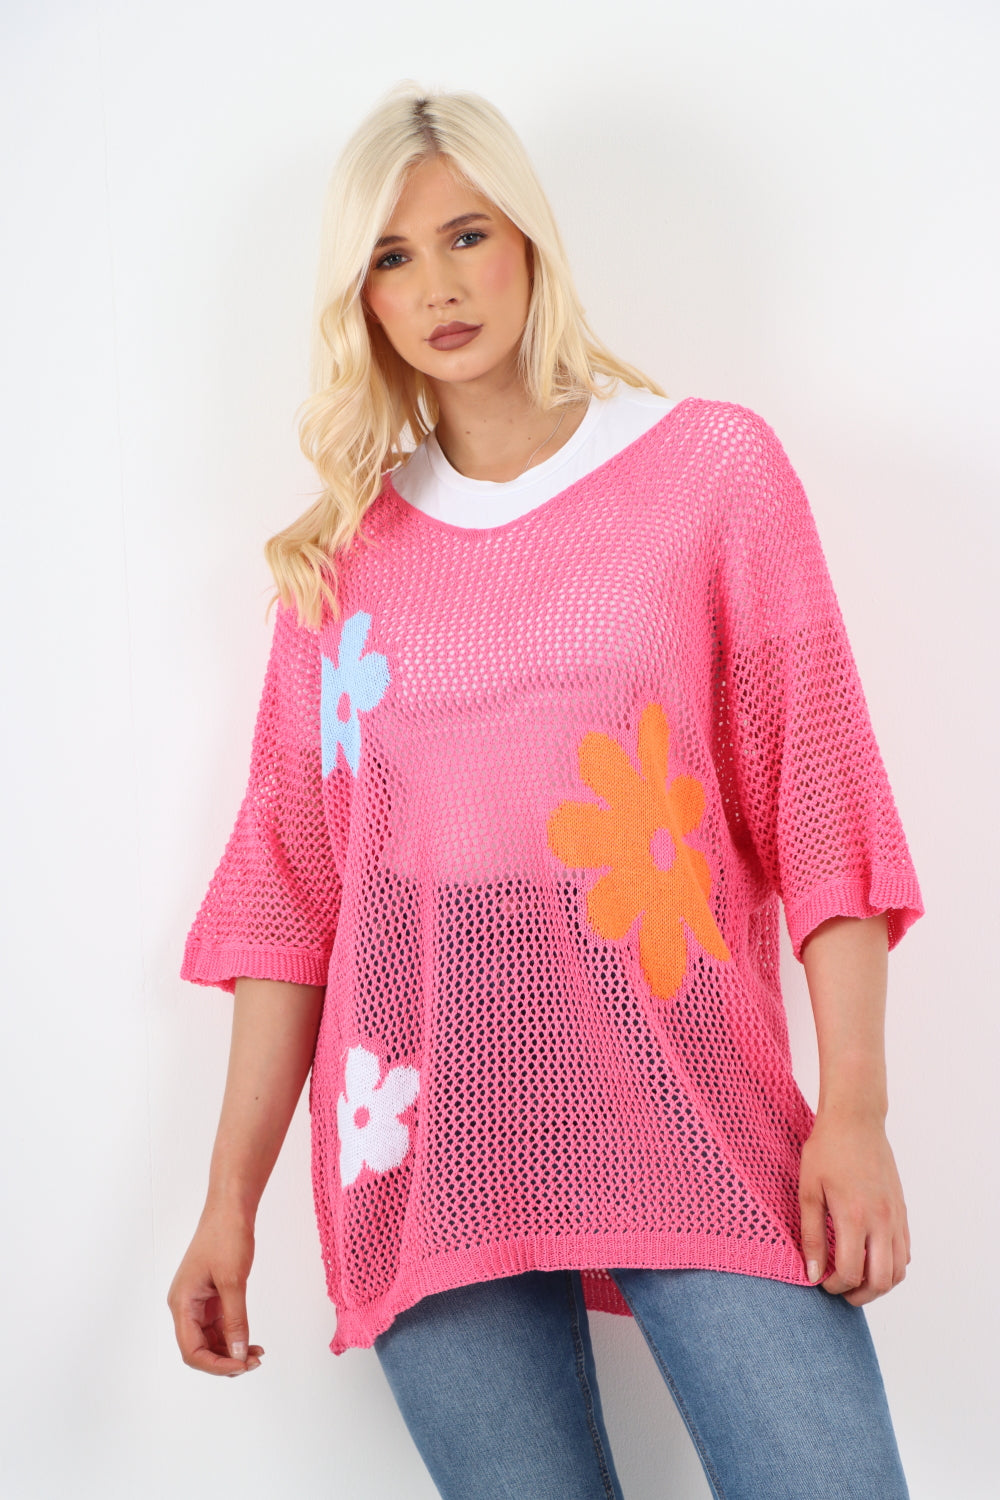 Italian Oversized Ditsy Floral Printed Mesh Net Jumper Top